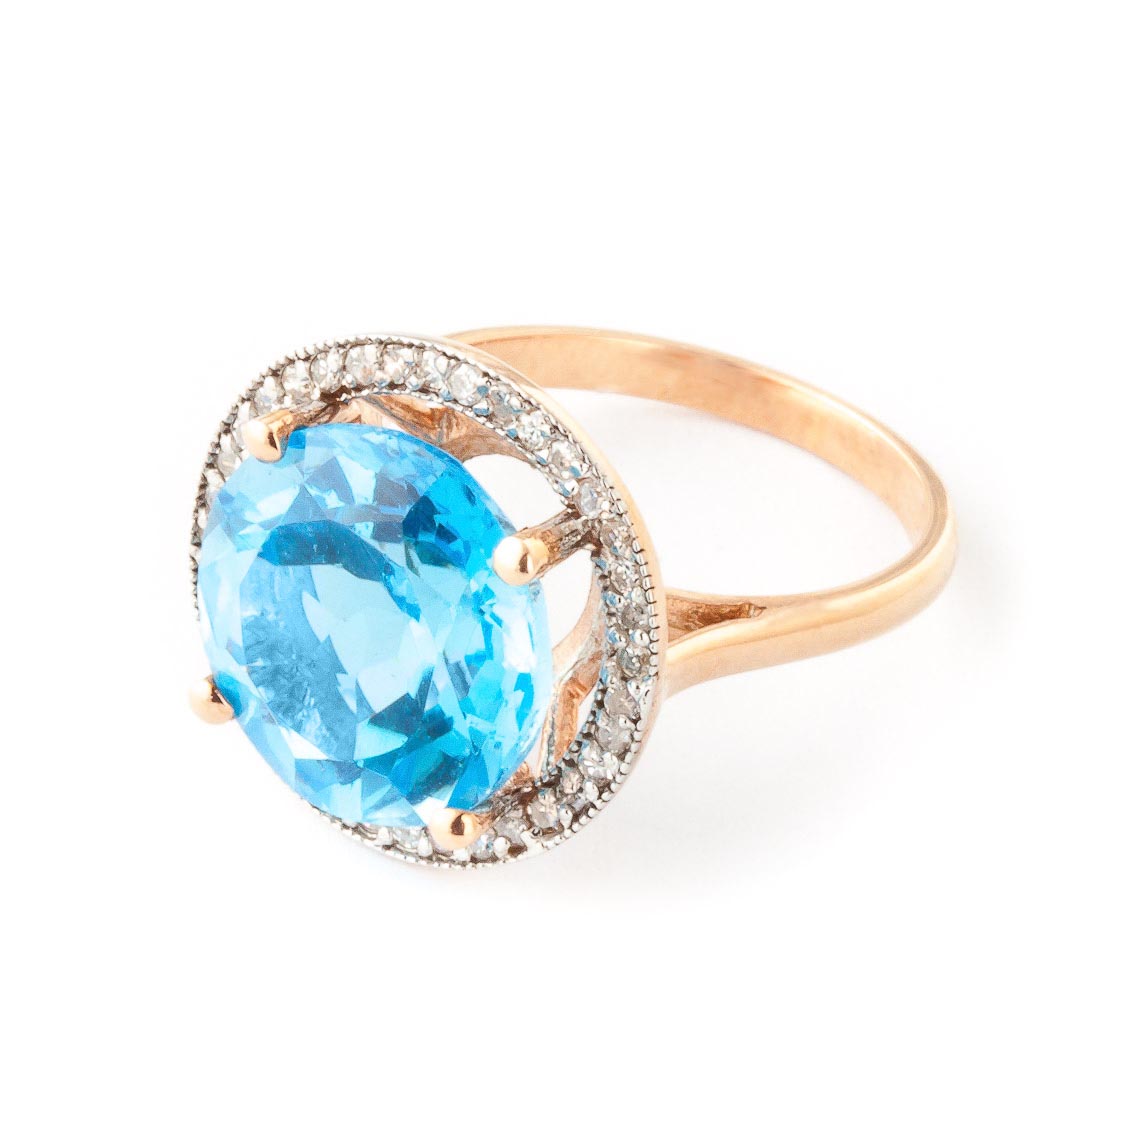 Blue Topaz Halo Ring 8 ctw in 9ct Rose Gold